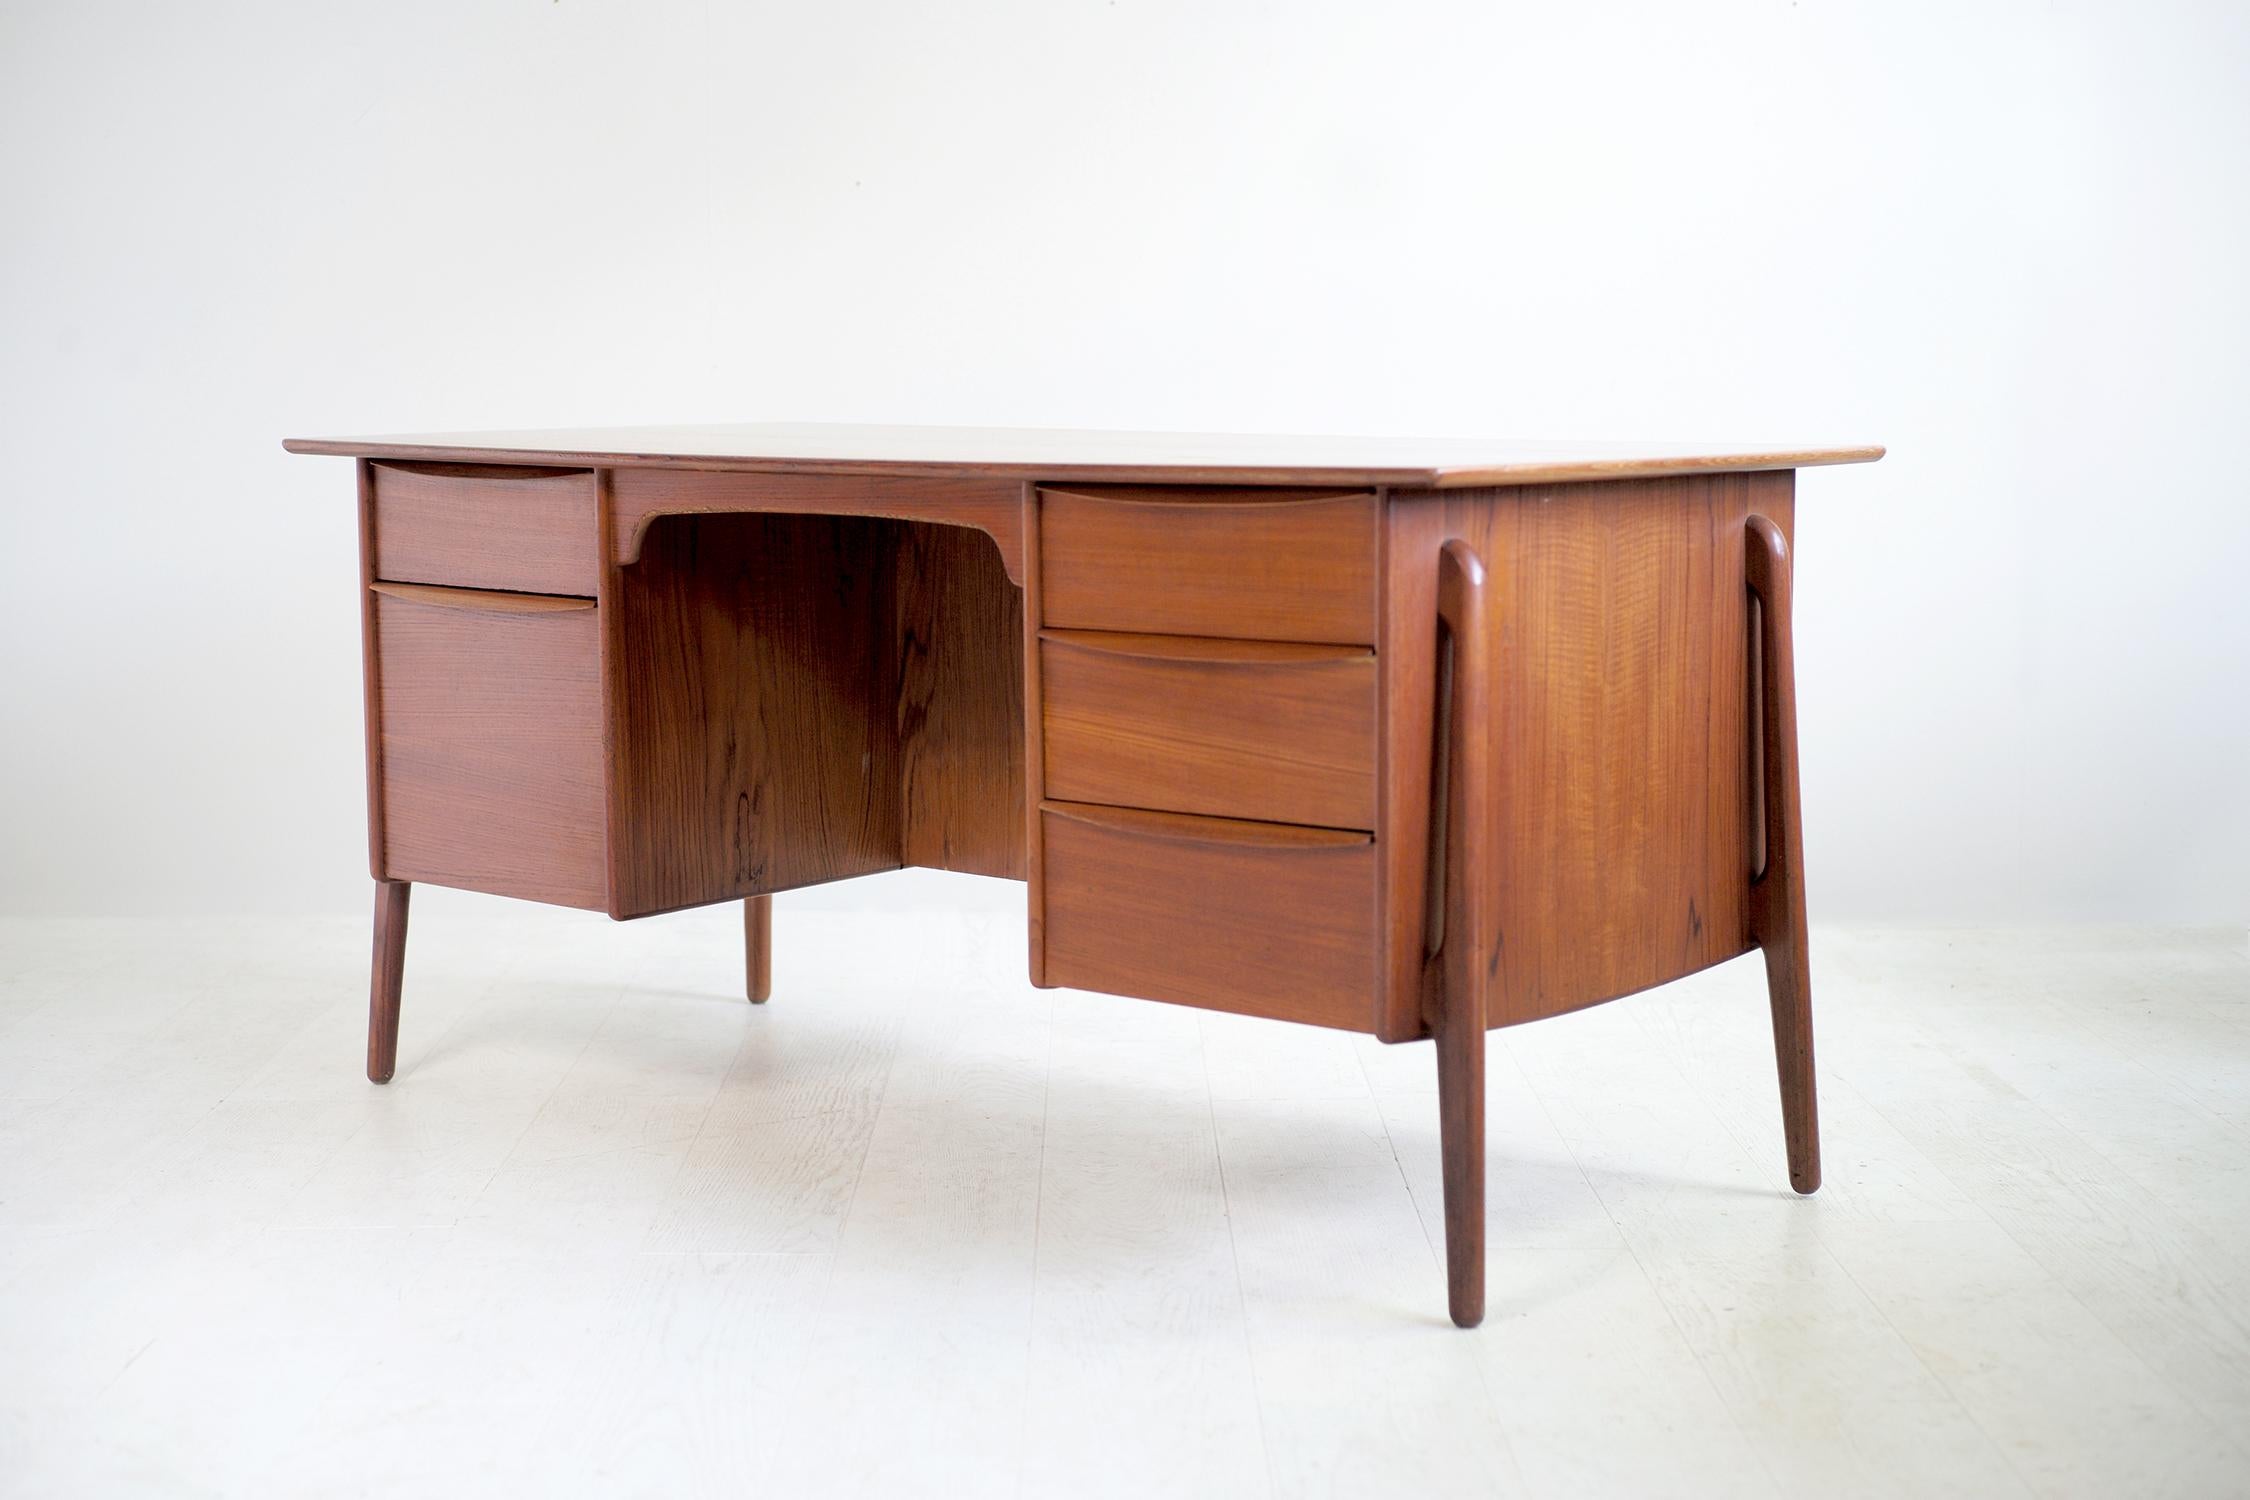 Middle desk with double box signed Svend Age Madsen, edited by Sigurd Hansen, Denmark, 1950.
The left box has a system drawer and a housing for hanging filing cabinets, the right box is equipped with three drawers. On the visitor side there is a